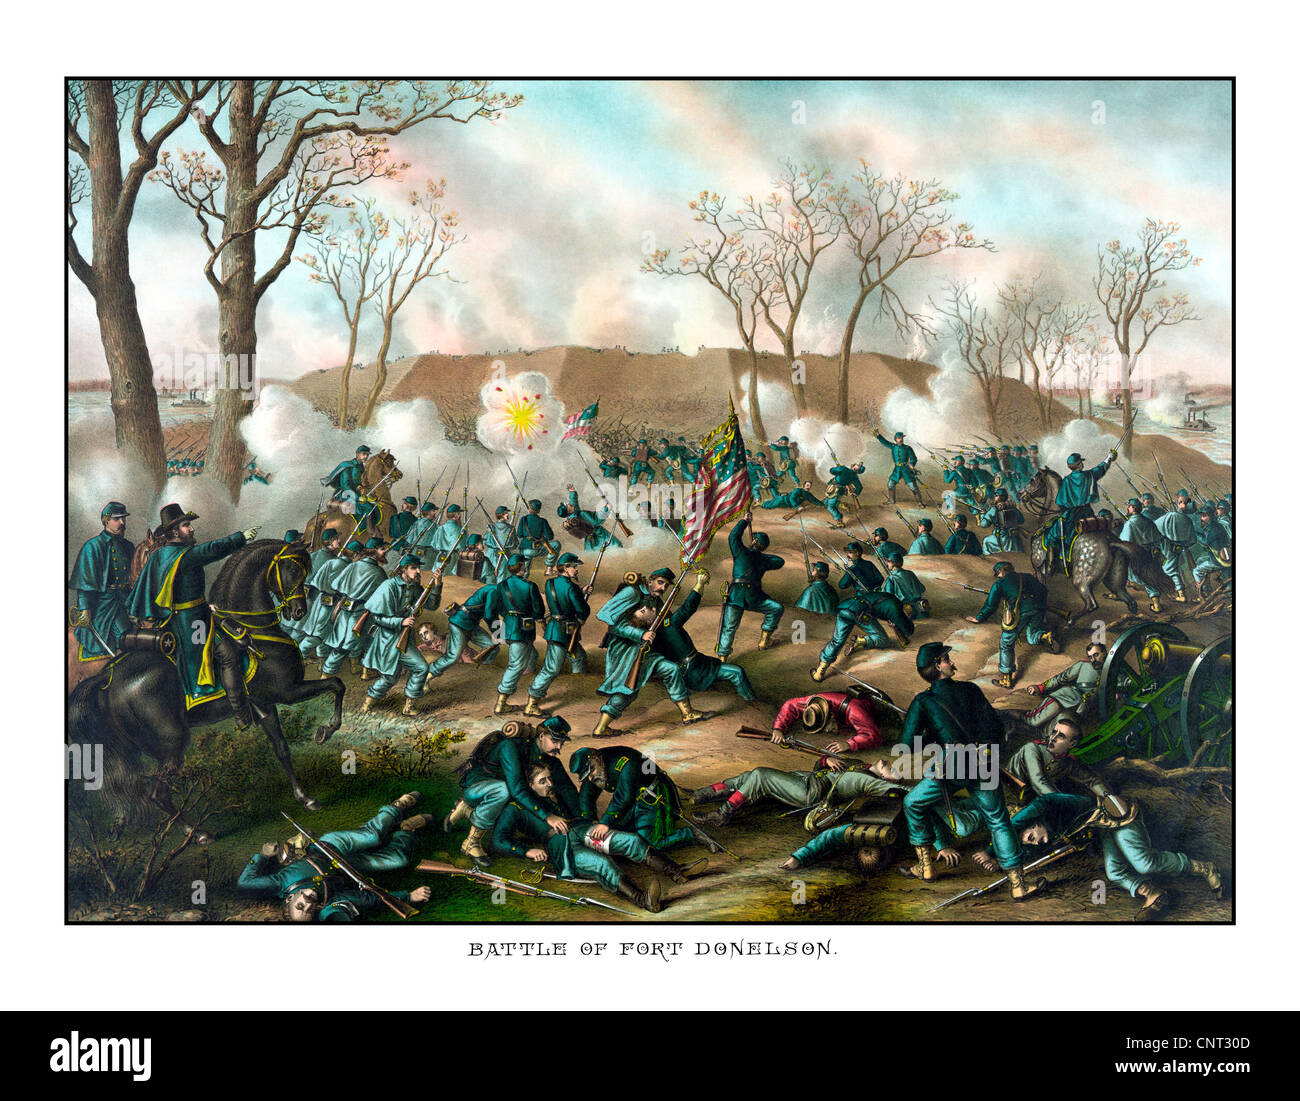 Civil War Print showing Union and Confederate troops fighting at The Battle of Fort Donelson. Stock Photo